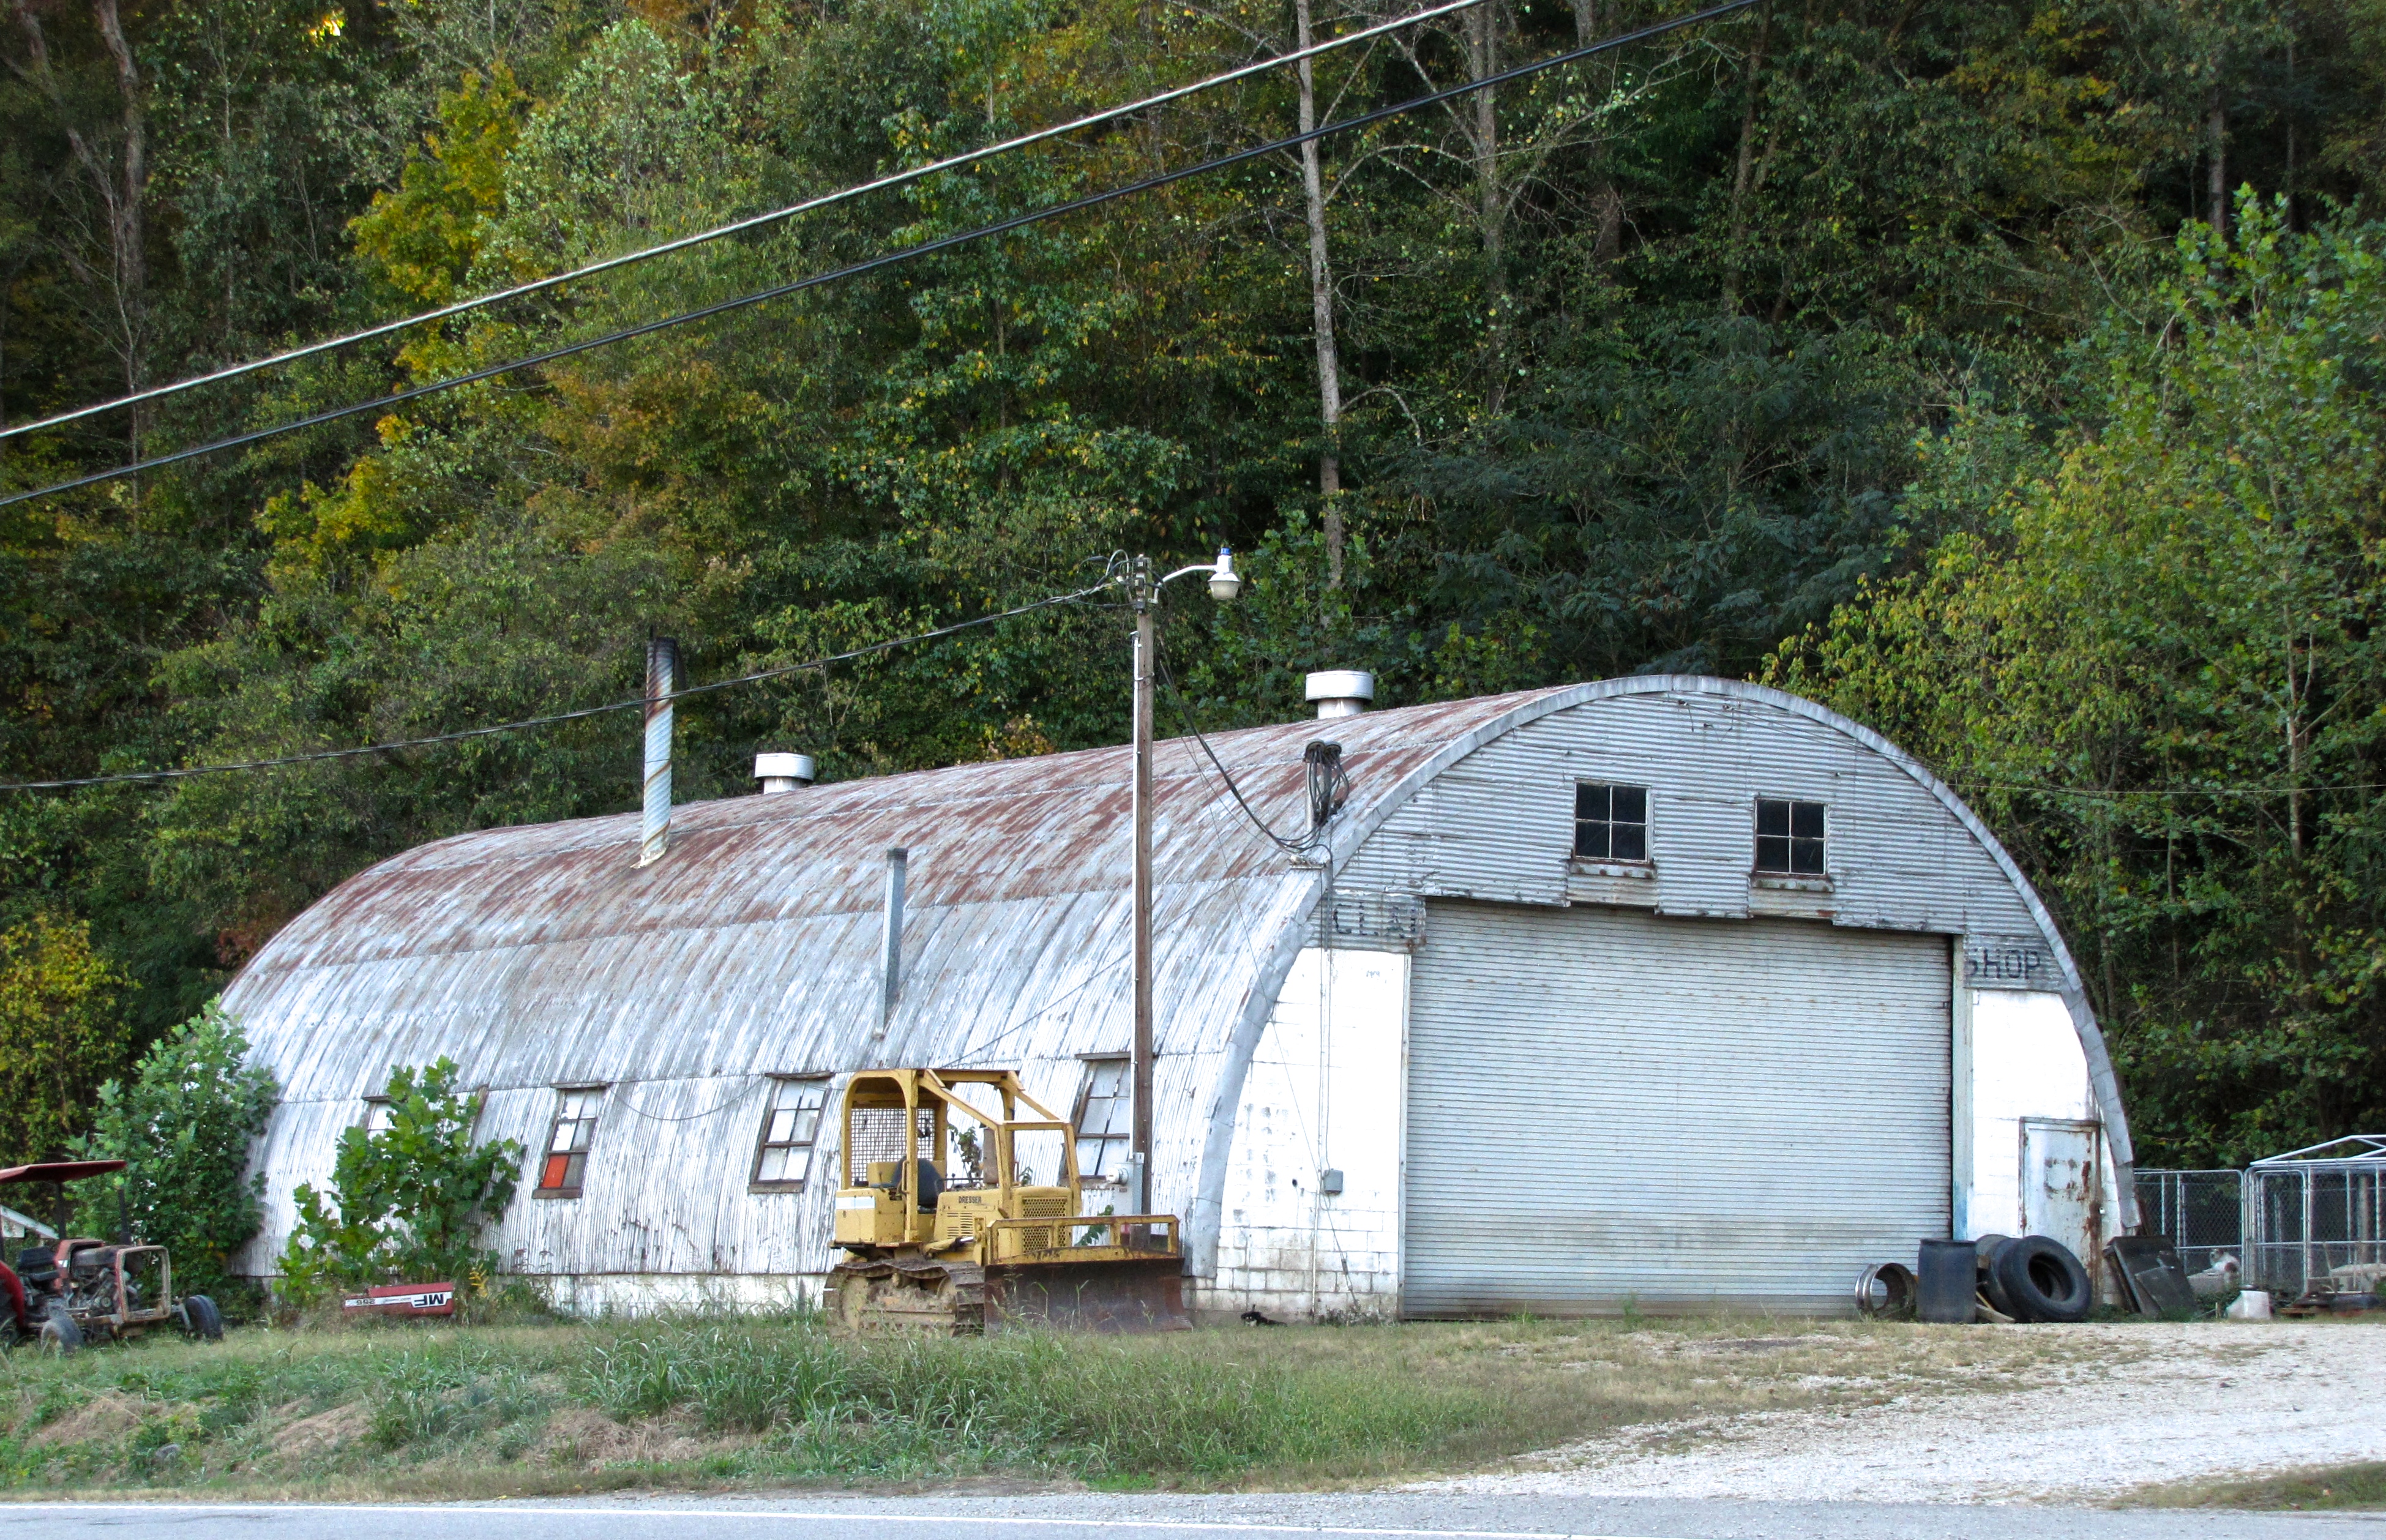 quonset hut in Pittsburgh, PA